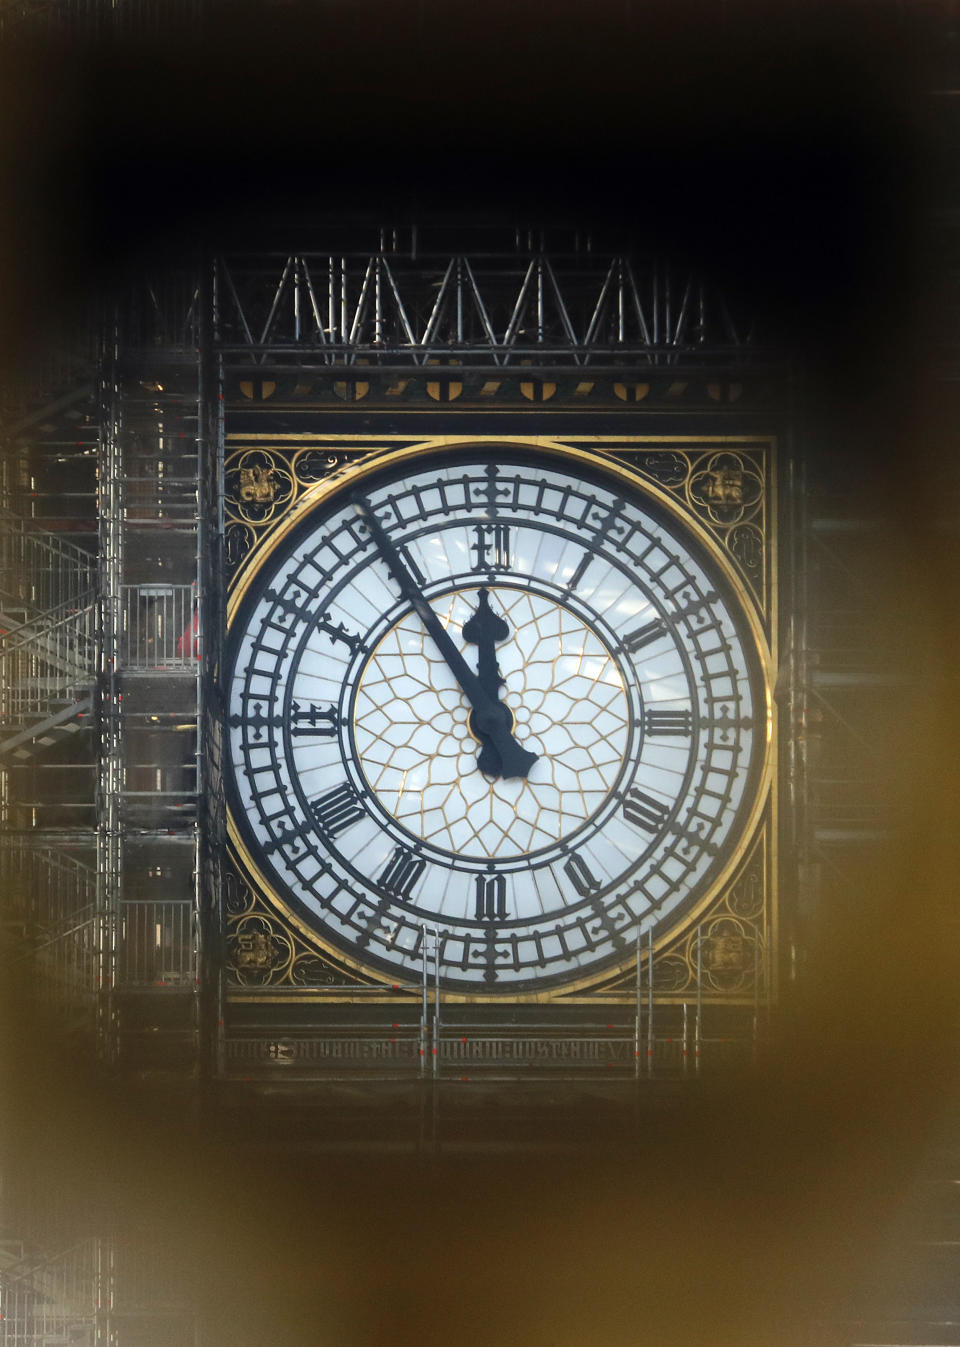 The Big Ben's clock shows five minutes to twelve, photographed through a binocular stand in London, Tuesday, Jan. 22, 2019. British Prime Minister Theresa May launched a mission to resuscitate her rejected European Union Brexit divorce deal, setting out plans to get it approved by Parliament. (AP Photo/Frank Augstein)